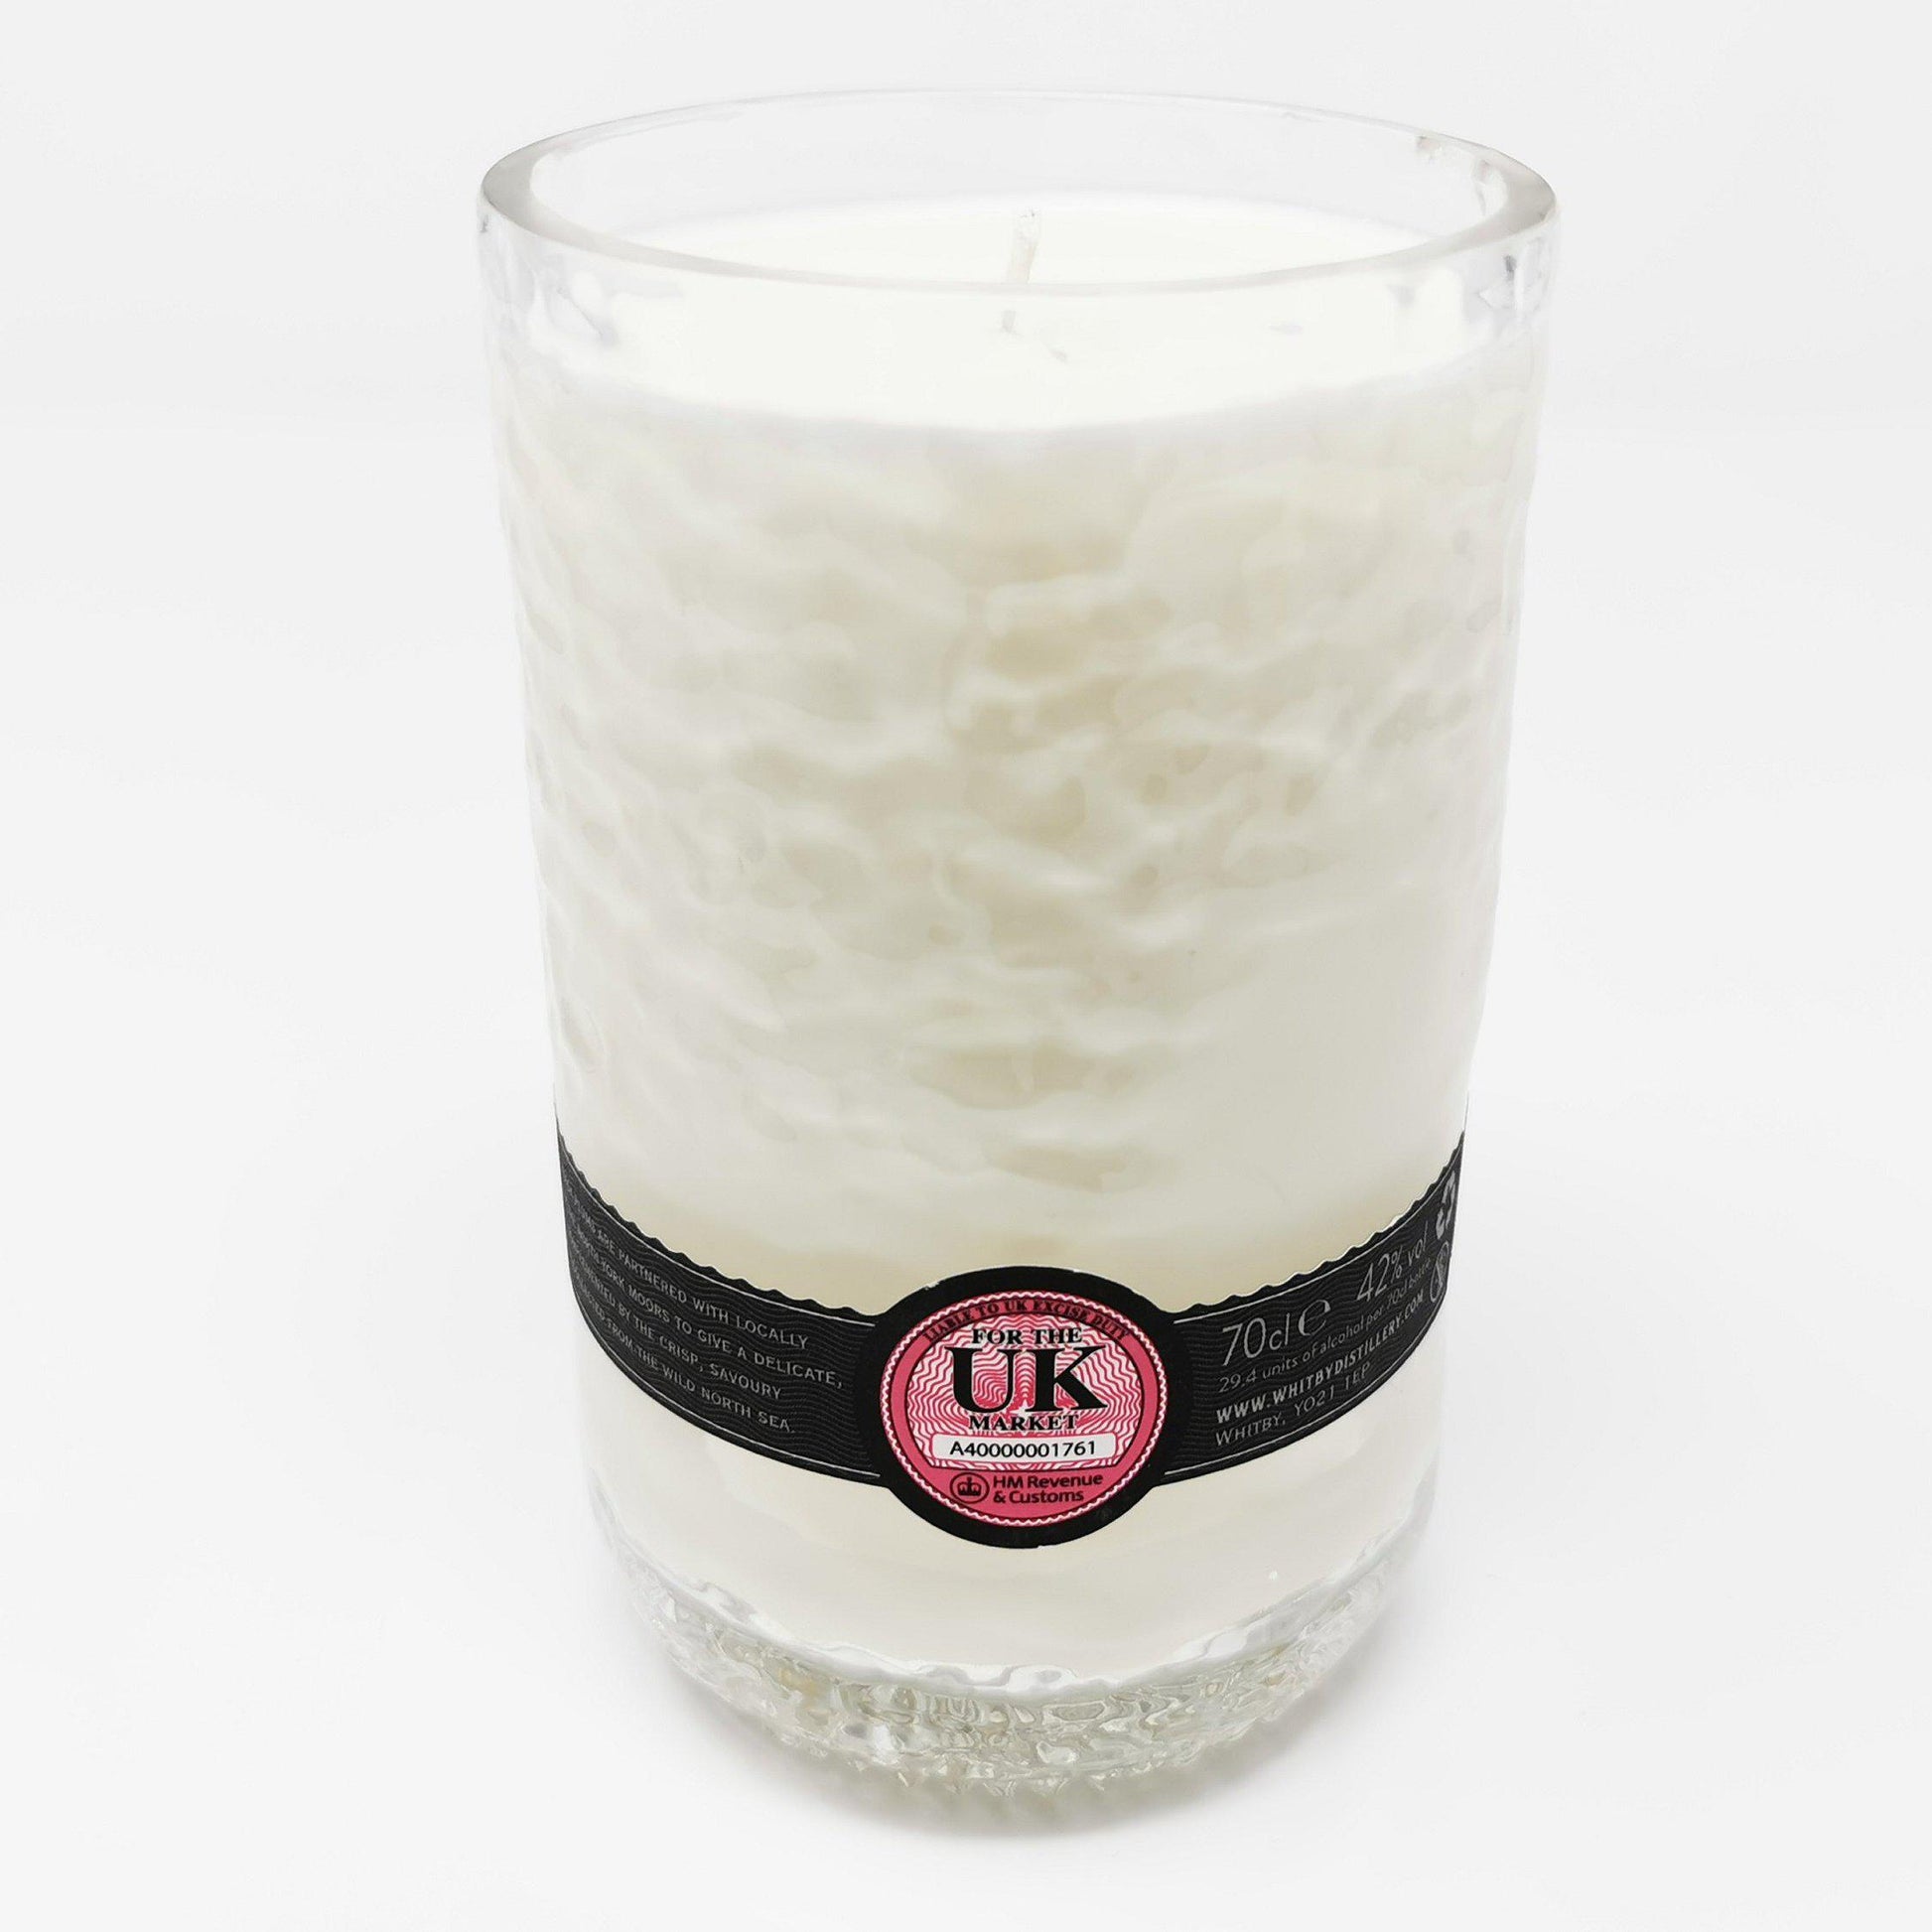 Whitby Gin Bottle Candle-Gin Bottle Candles-Adhock Homeware